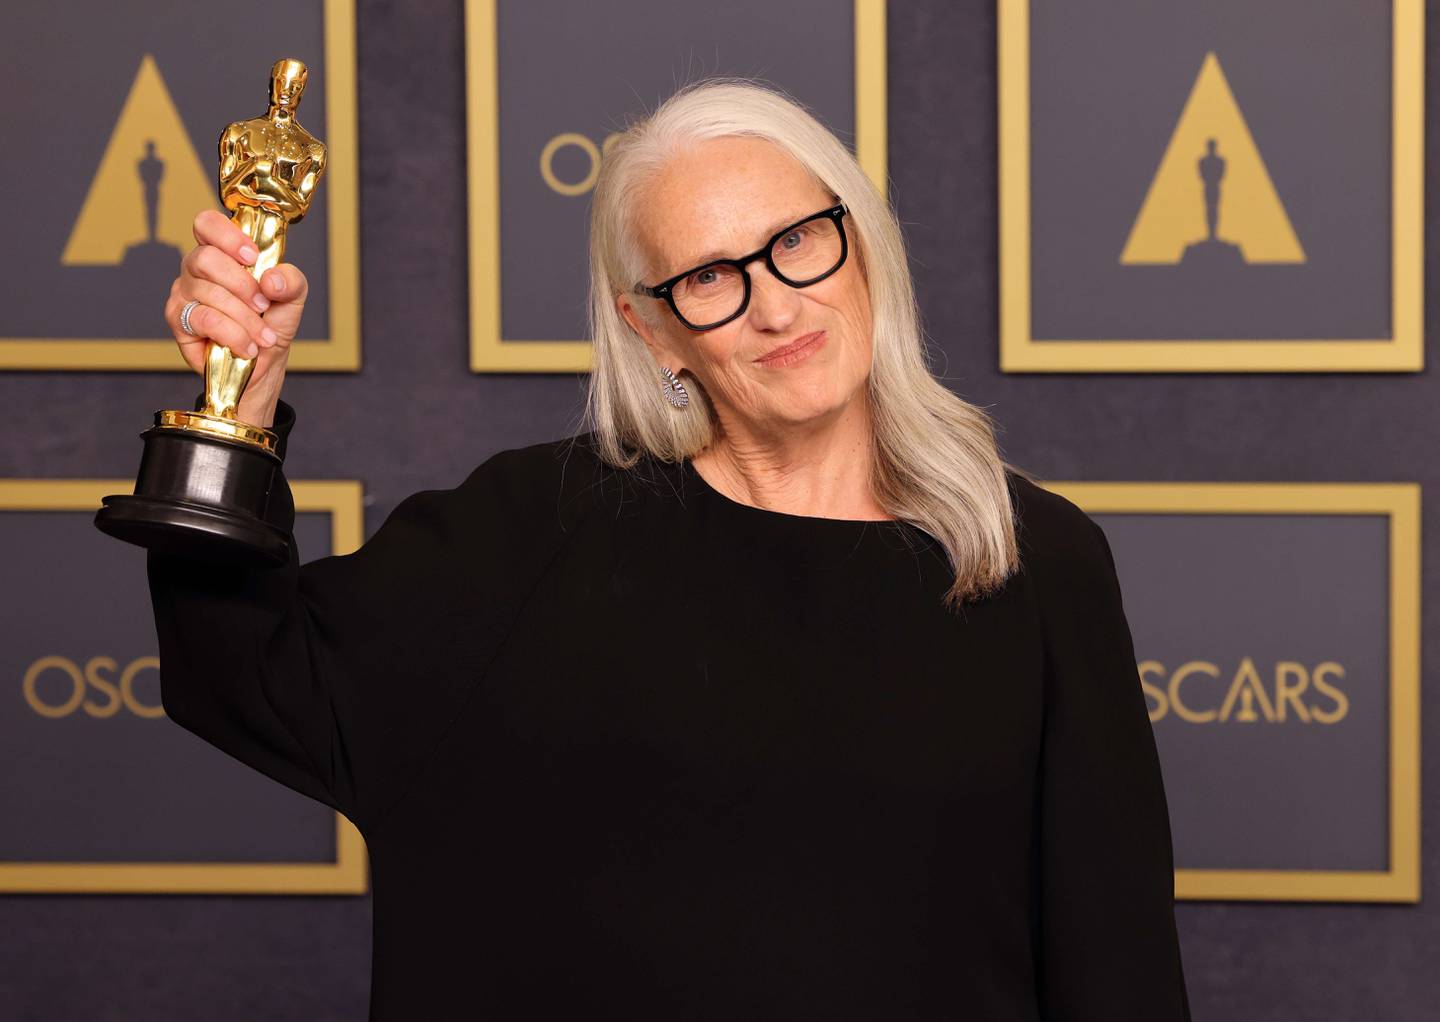 Jane Campion was awarded the Silver Lion for her film 'The Power of the Dog' at last year's Venice Film Festival; she went on to win the Oscar for Best Director. AFP
